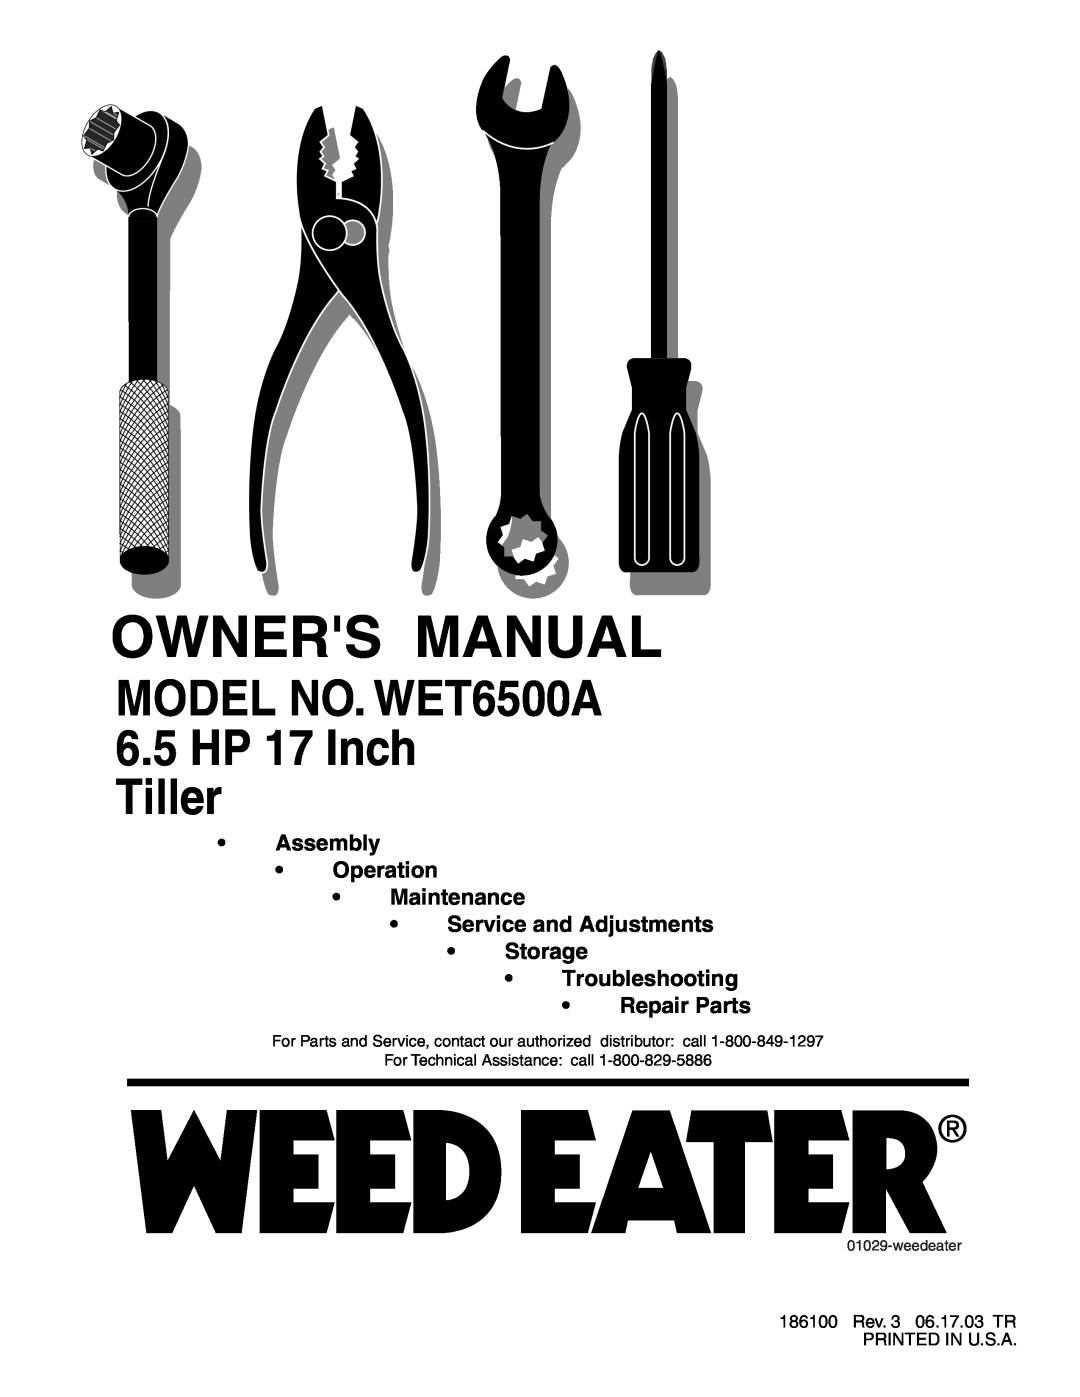 Weed Eater owner manual Owners Manual, MODEL NO. WET6500A 6.5 HP 17 Inch Tiller, Troubleshooting Repair Parts 